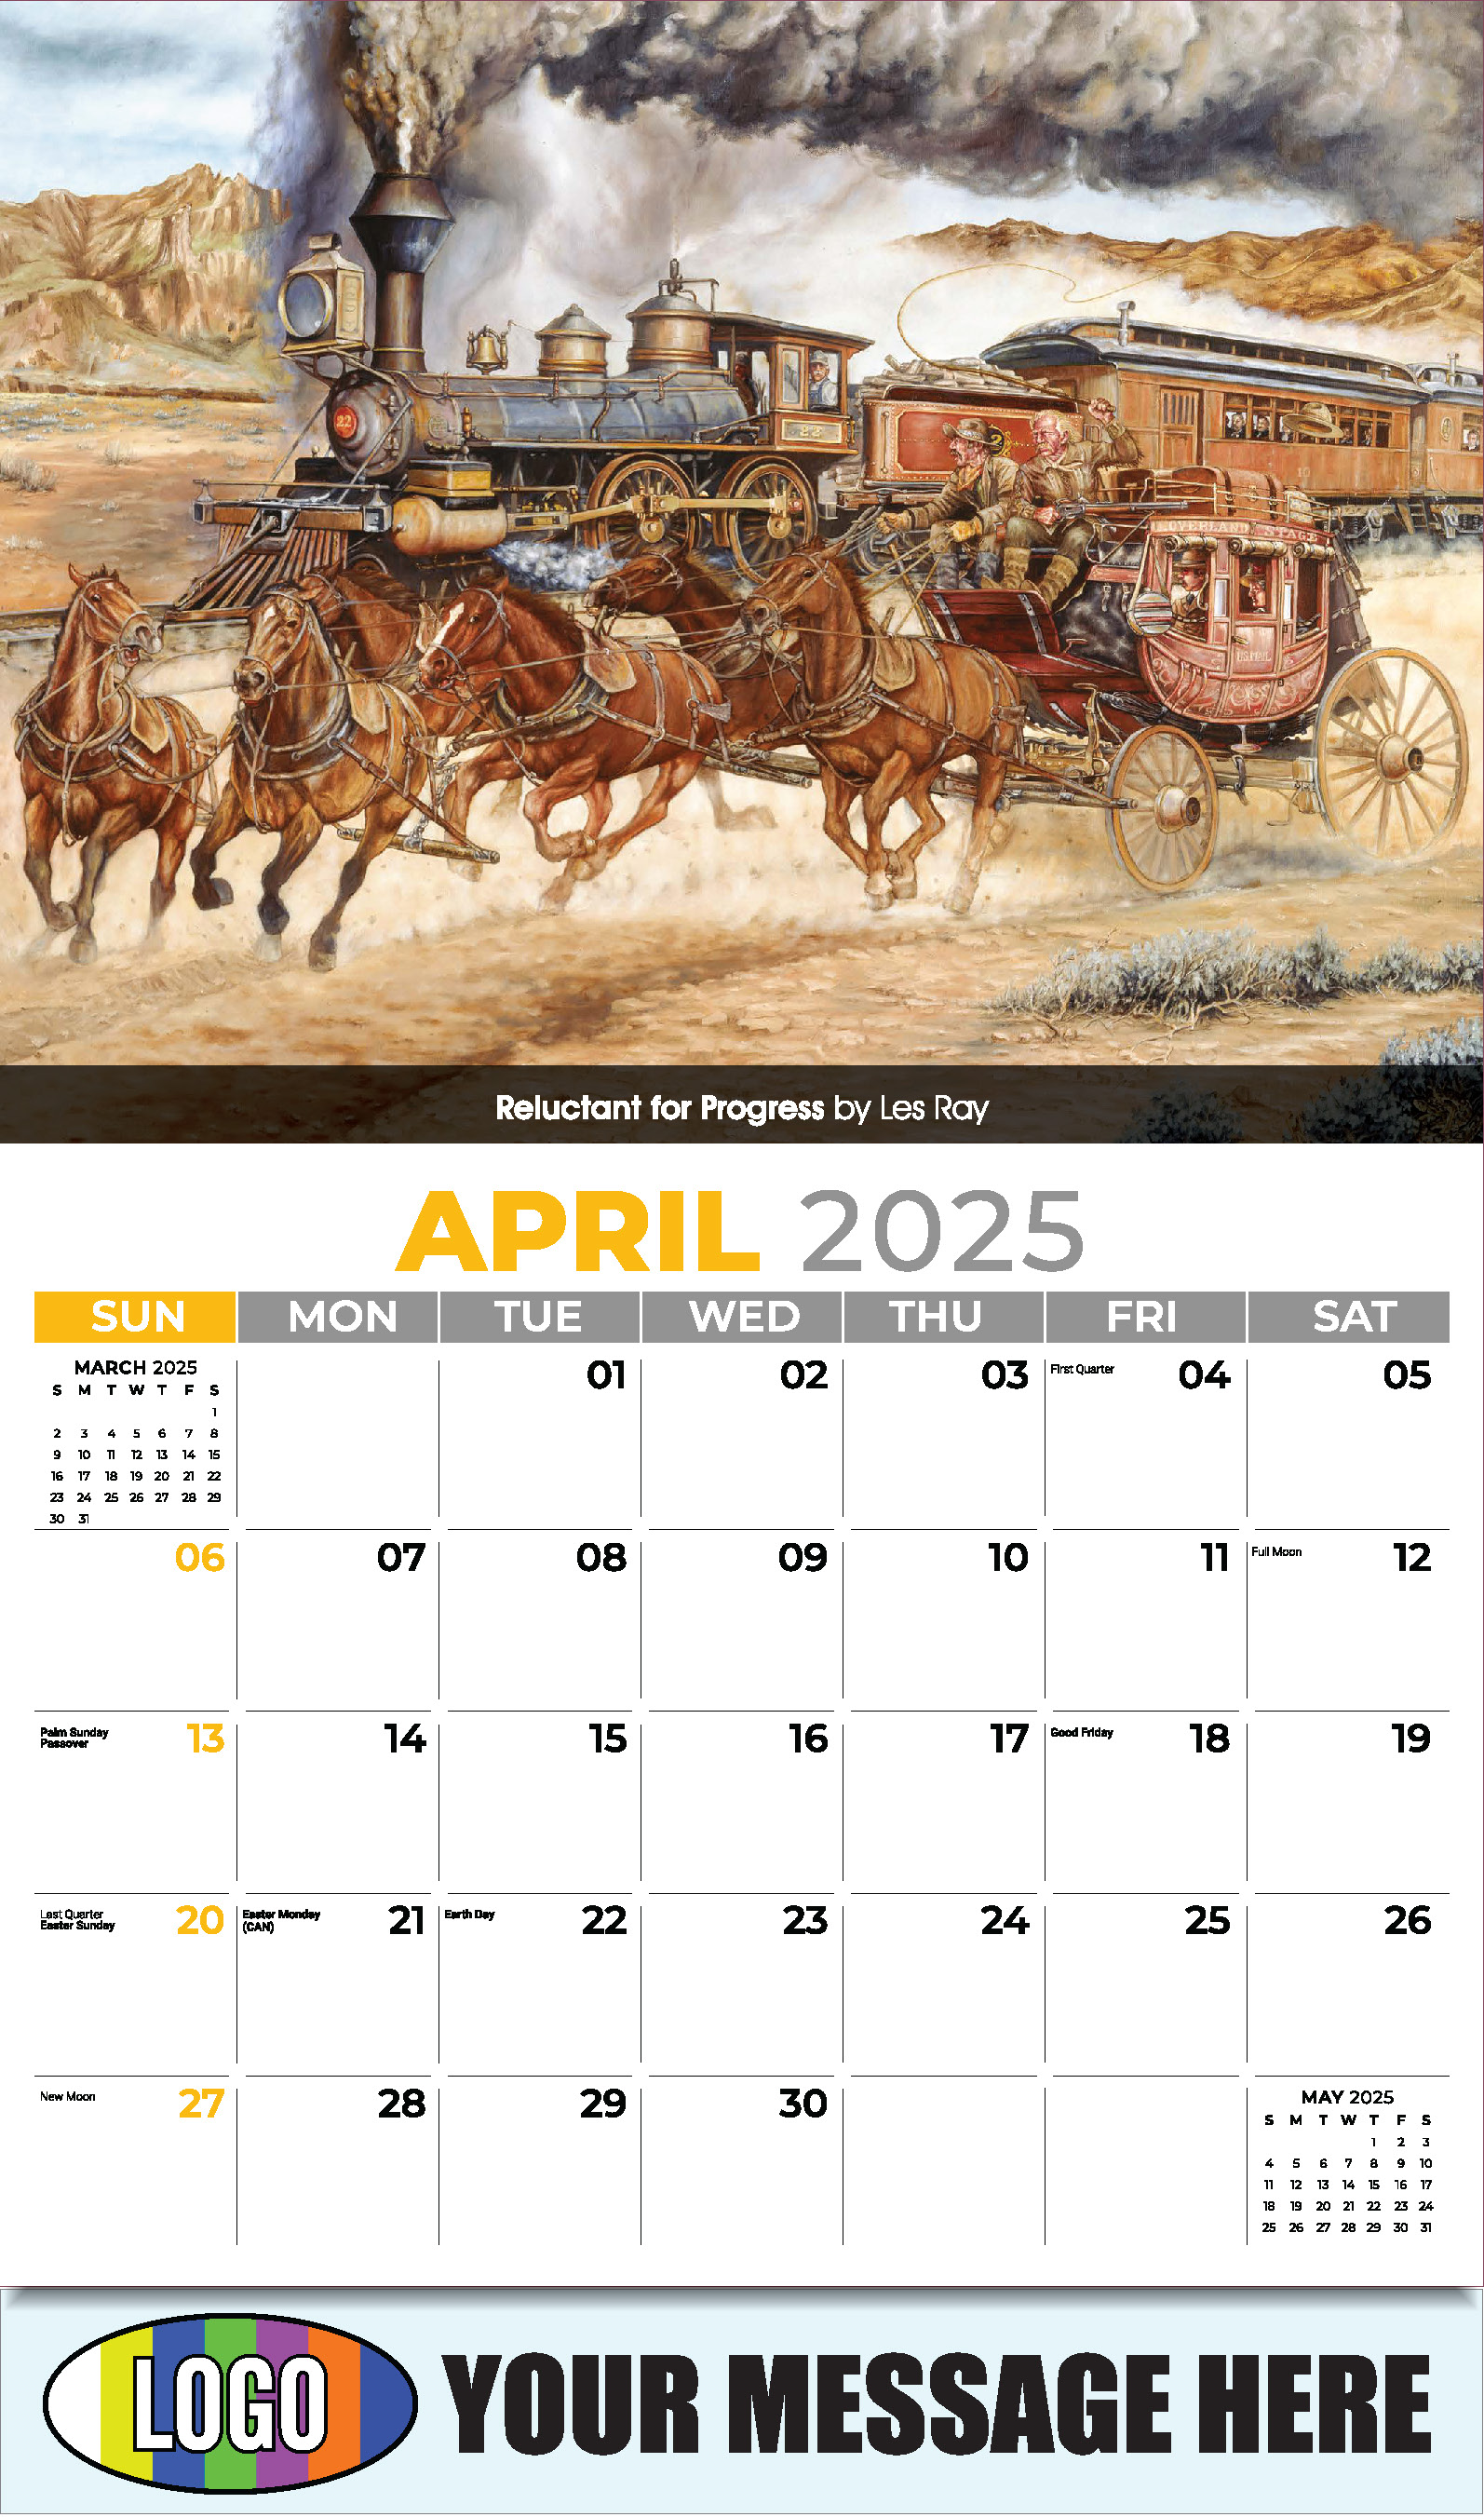 Spirit of the Old West 2025 Old West Art Business Promo Wall Calendar - April